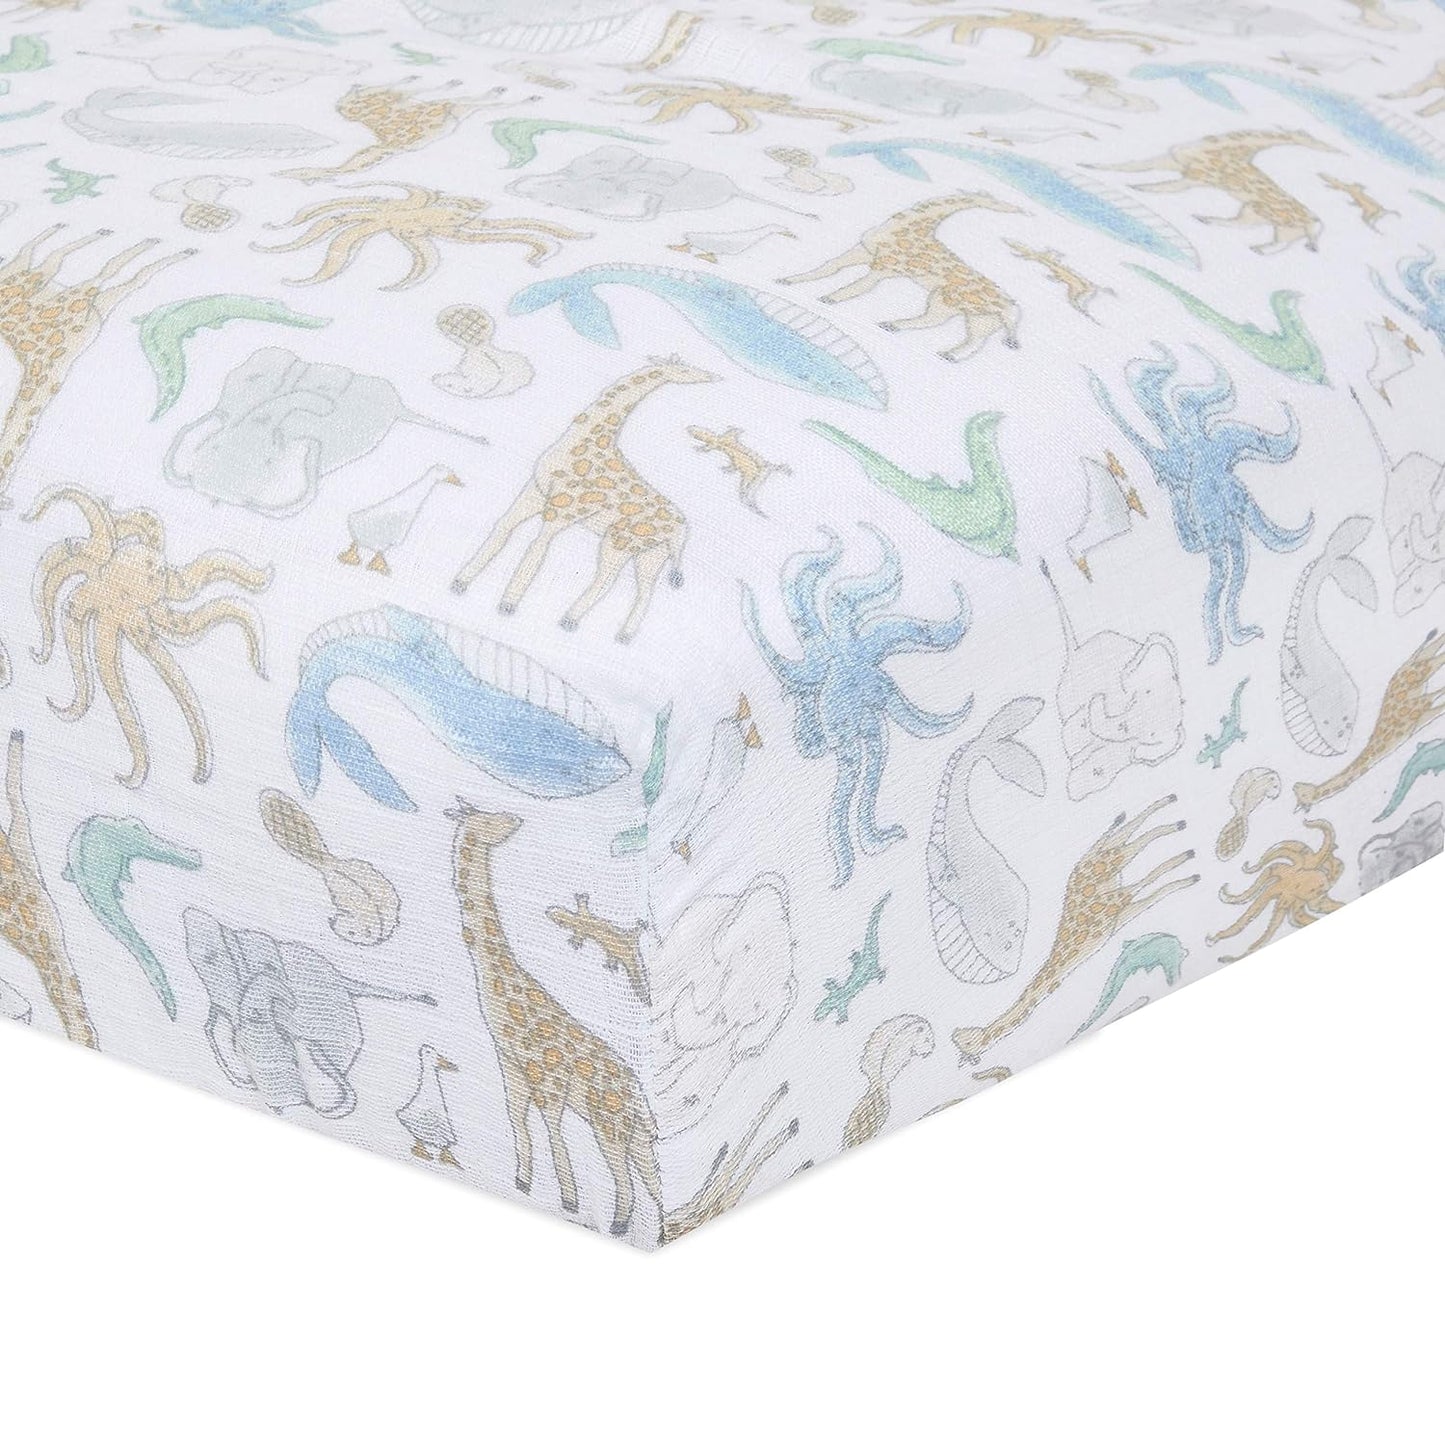 aden + anais Essentials Classic Crib Sheet, 100% Cotton Muslin, Super Soft & Breathable, Tailored Snug Fit, Flowers Bloom